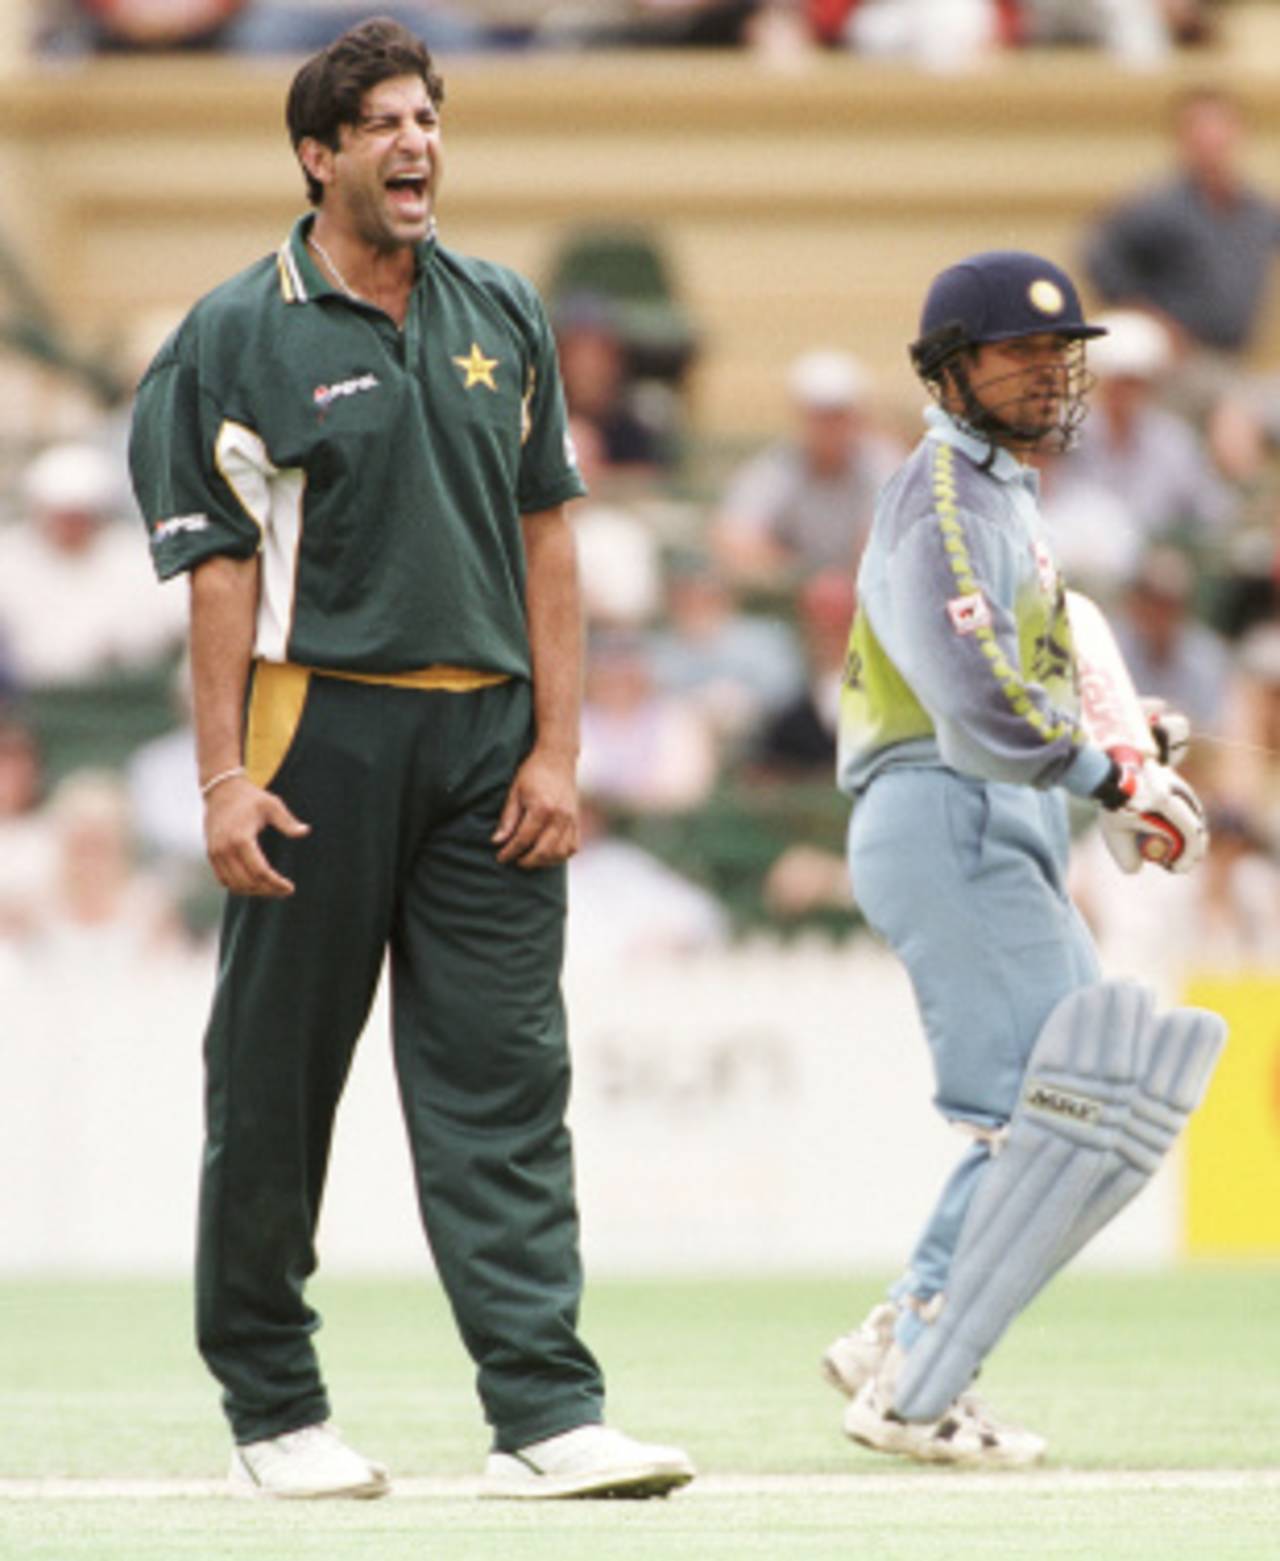 Wasim Akram is frustrated by his fielders as Sachin Tendulkar looks on, India v Pakistan, Carlton and Breweries United, Adelaide, January 25, 2000